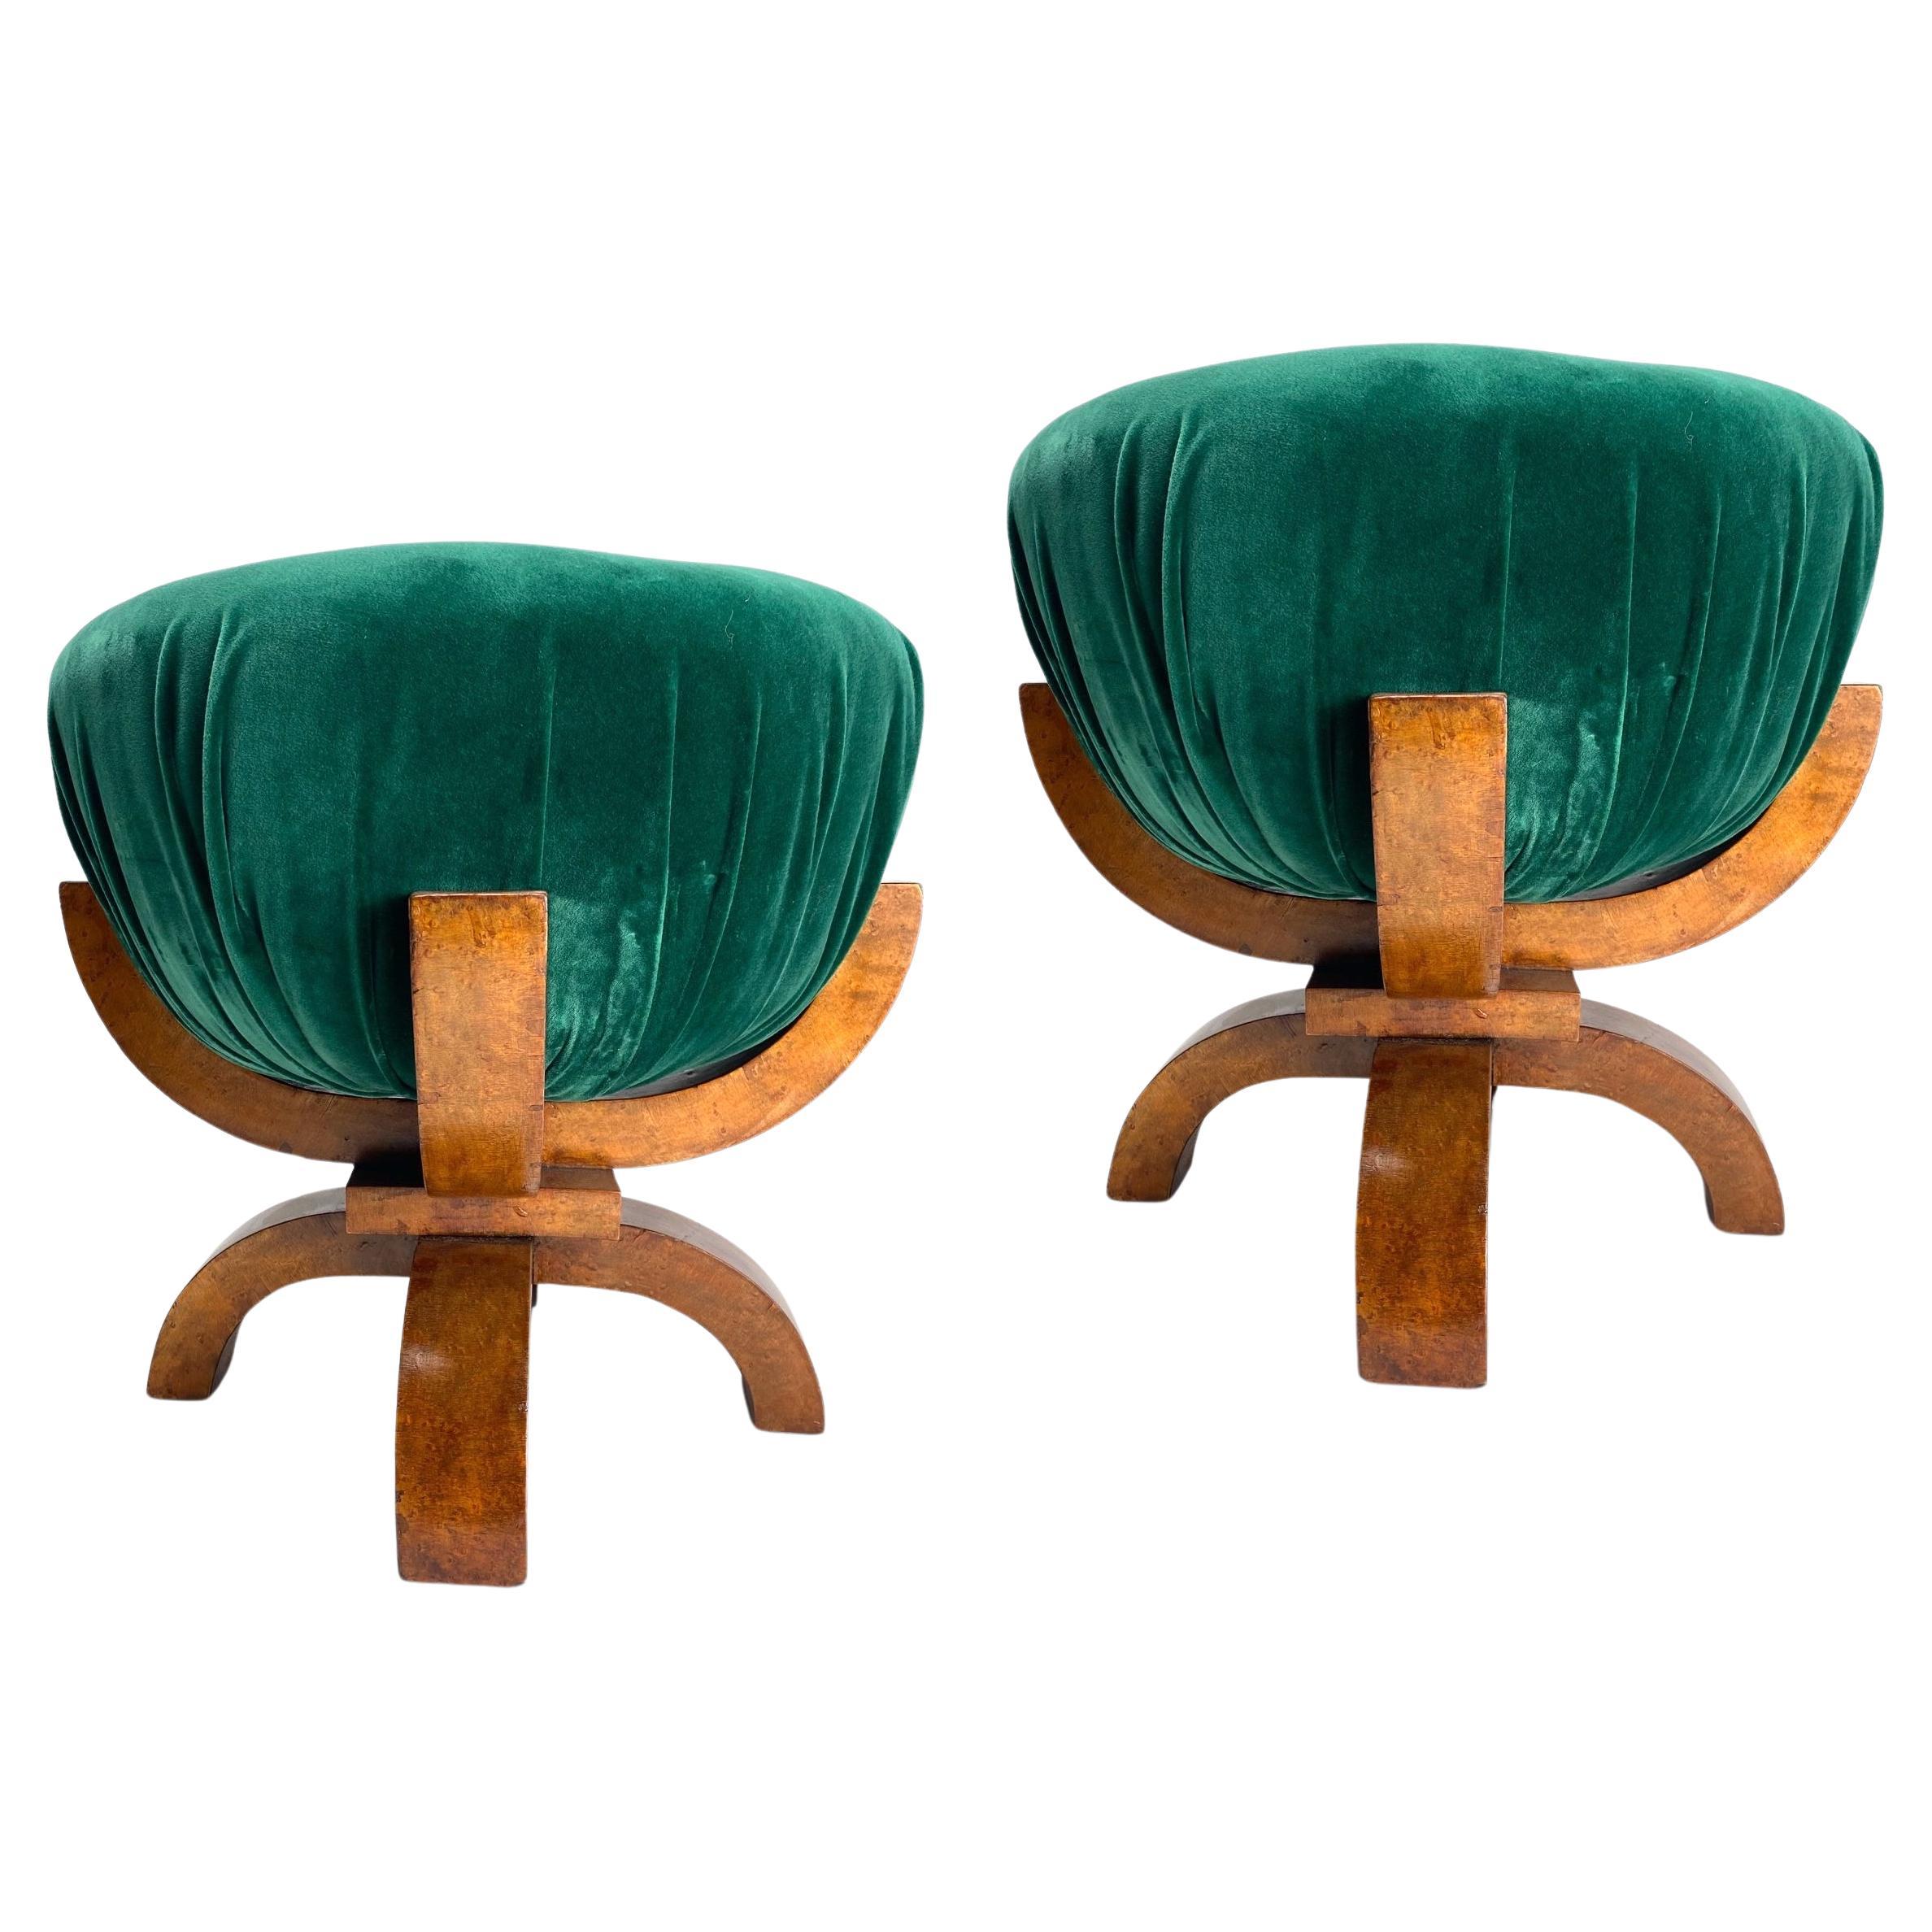 Pair of Art Deco Sculptural Poufs in briar, Italy, 1930s